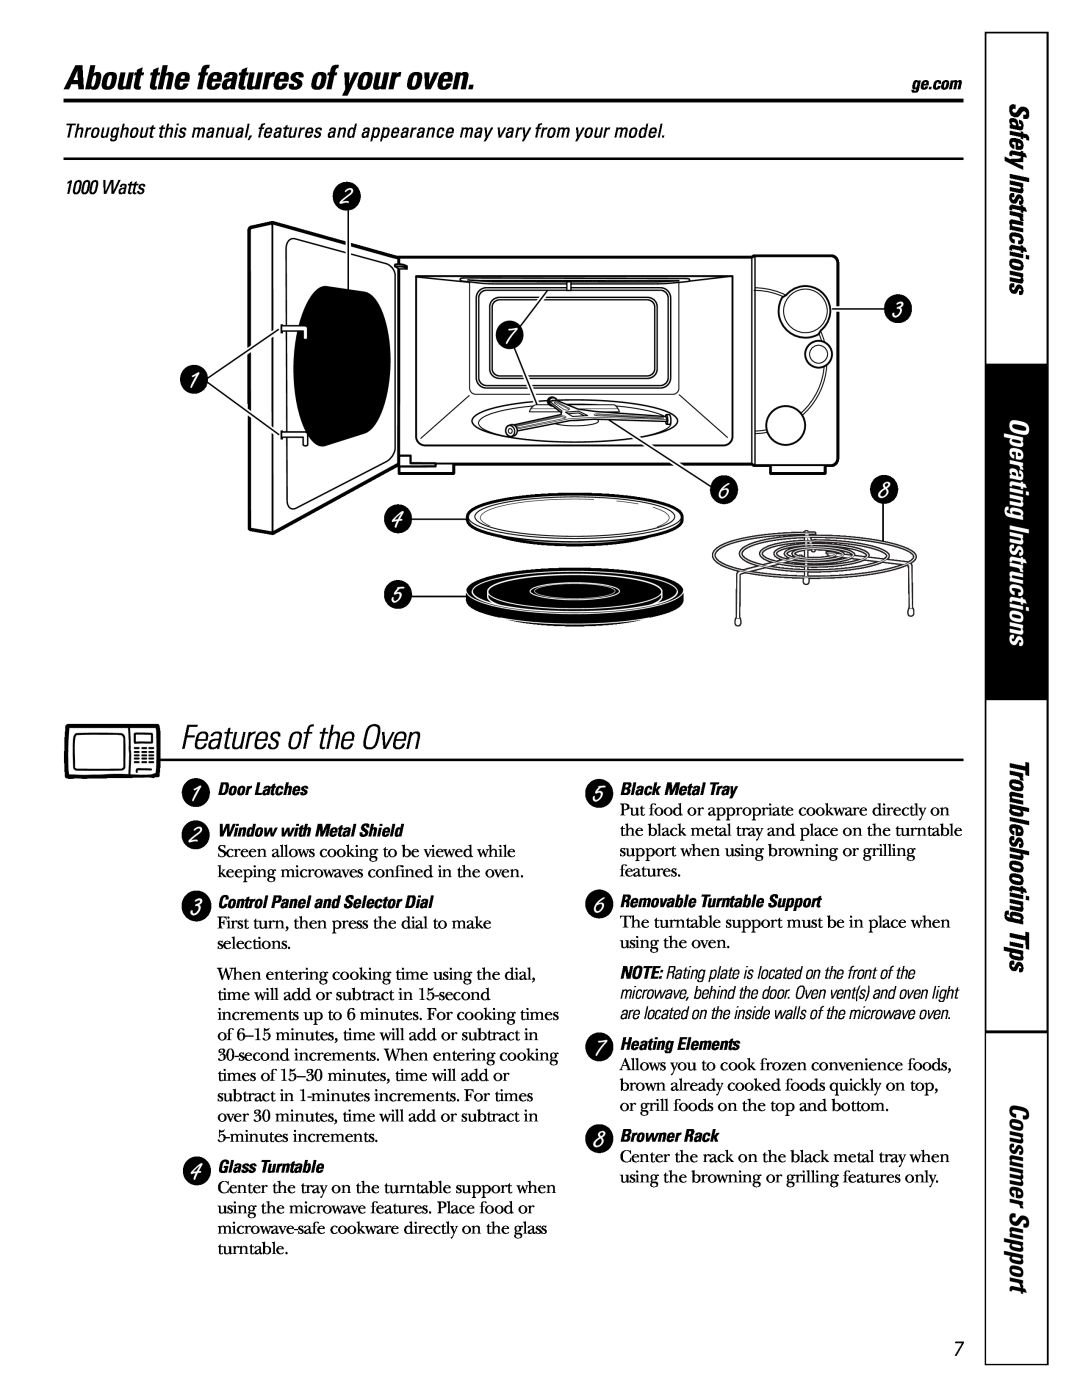 GE JES1288 About the features of your oven, Features of the Oven, Safety Instructions, Operating Instructions, Watts 